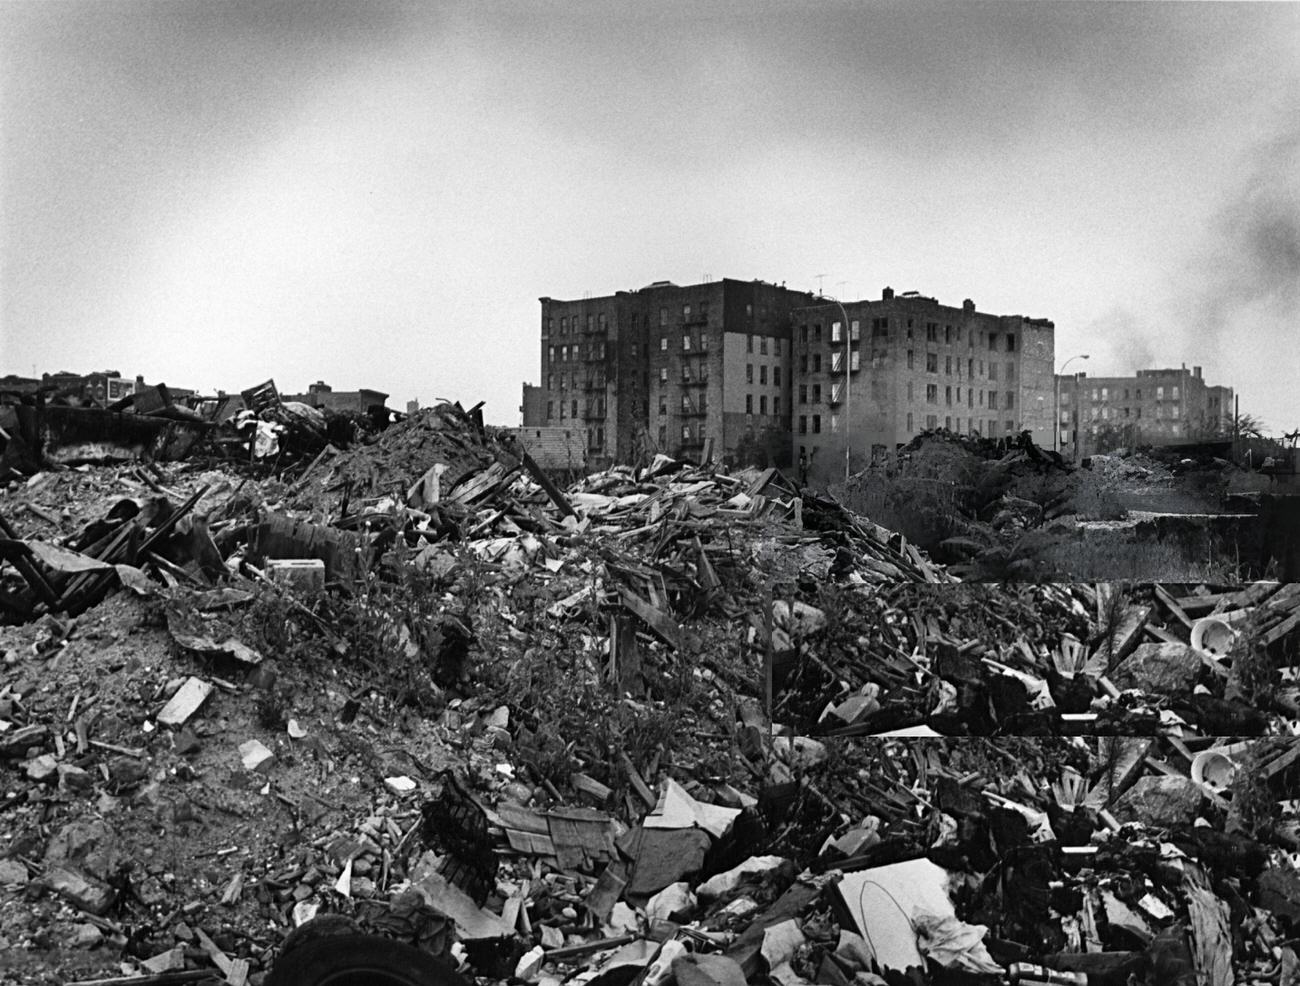 Across Rubble, Abandoned Apartment Buildings In The South Bronx Are Visible, 1977.